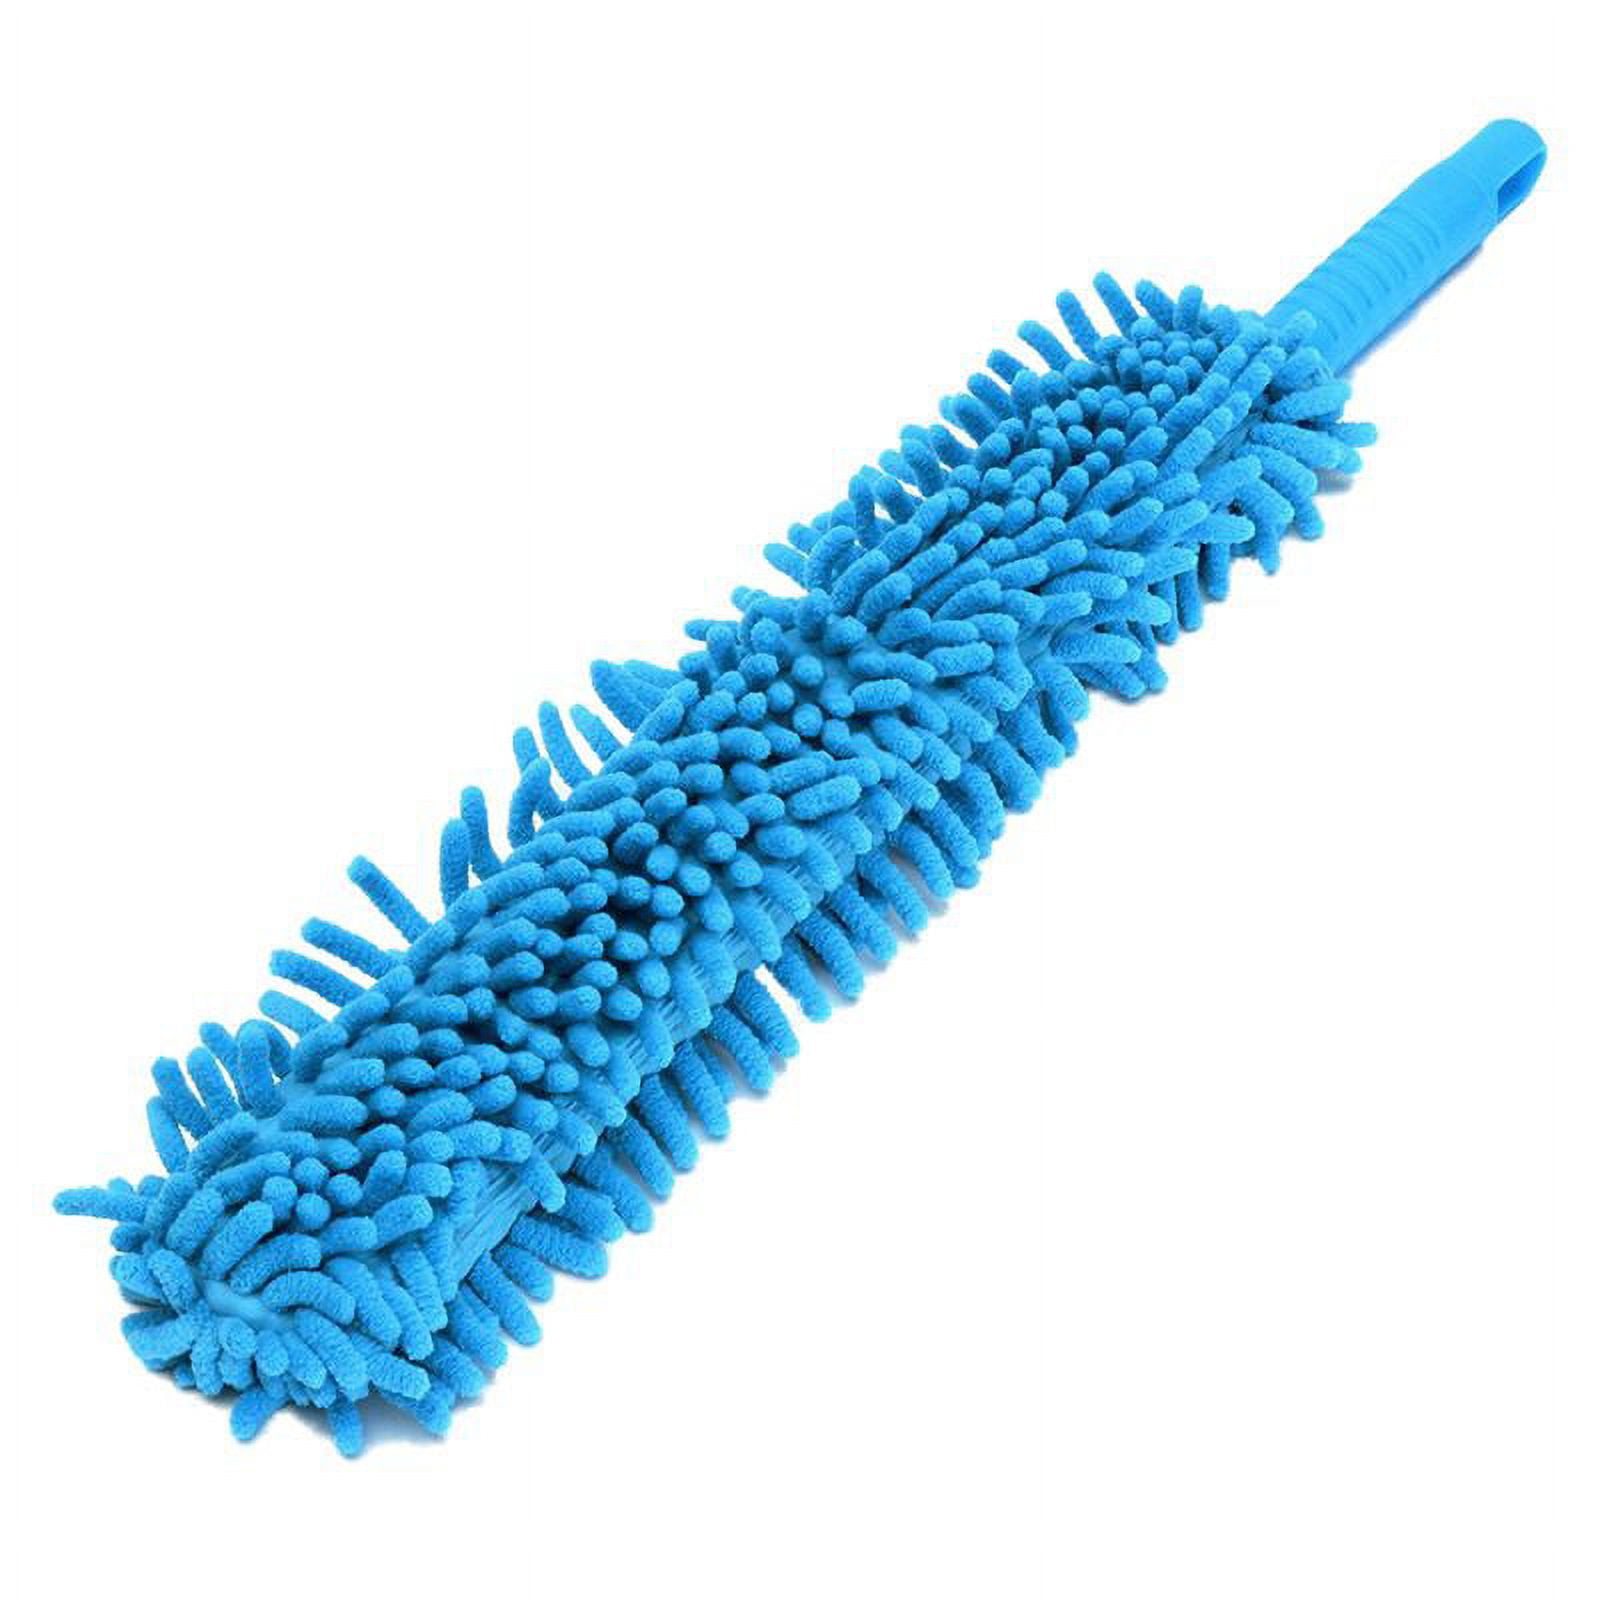 EVERSPROUT 11-inch Scrub Brush with Built-in Rubber Bumper 